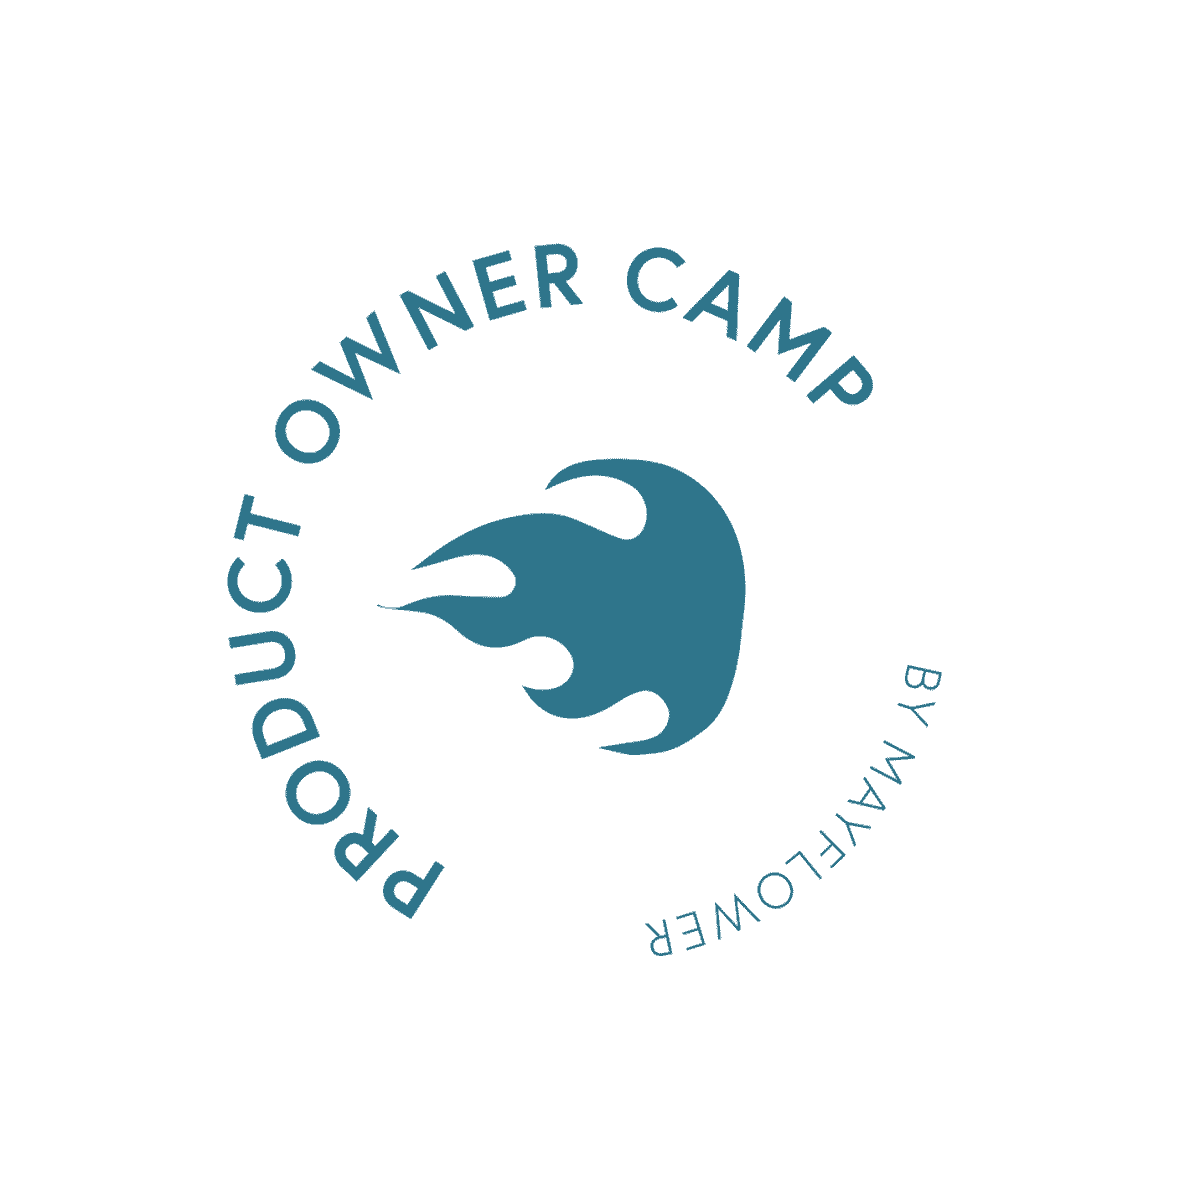 Product Owner Camp